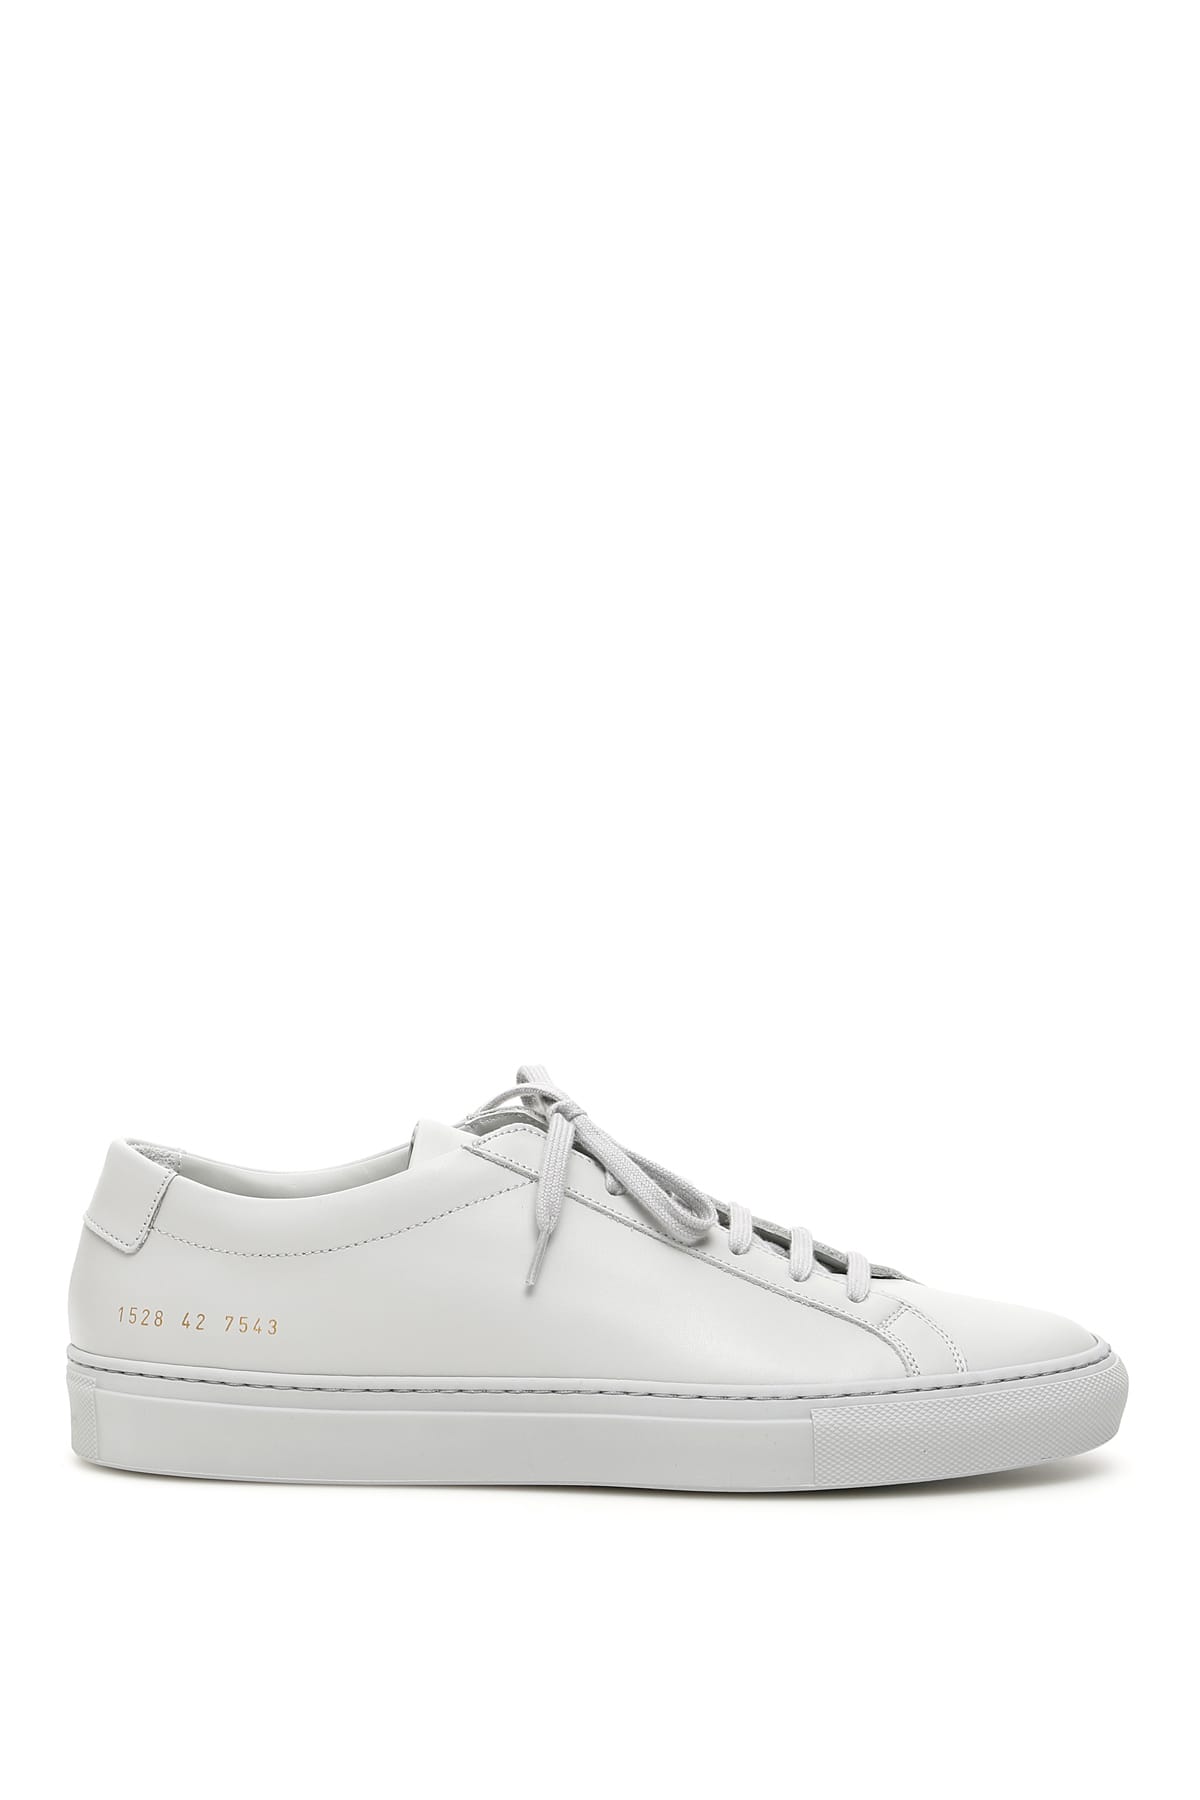 Shop Common Projects Original Achilles Low Sneakers In Grey (grey)